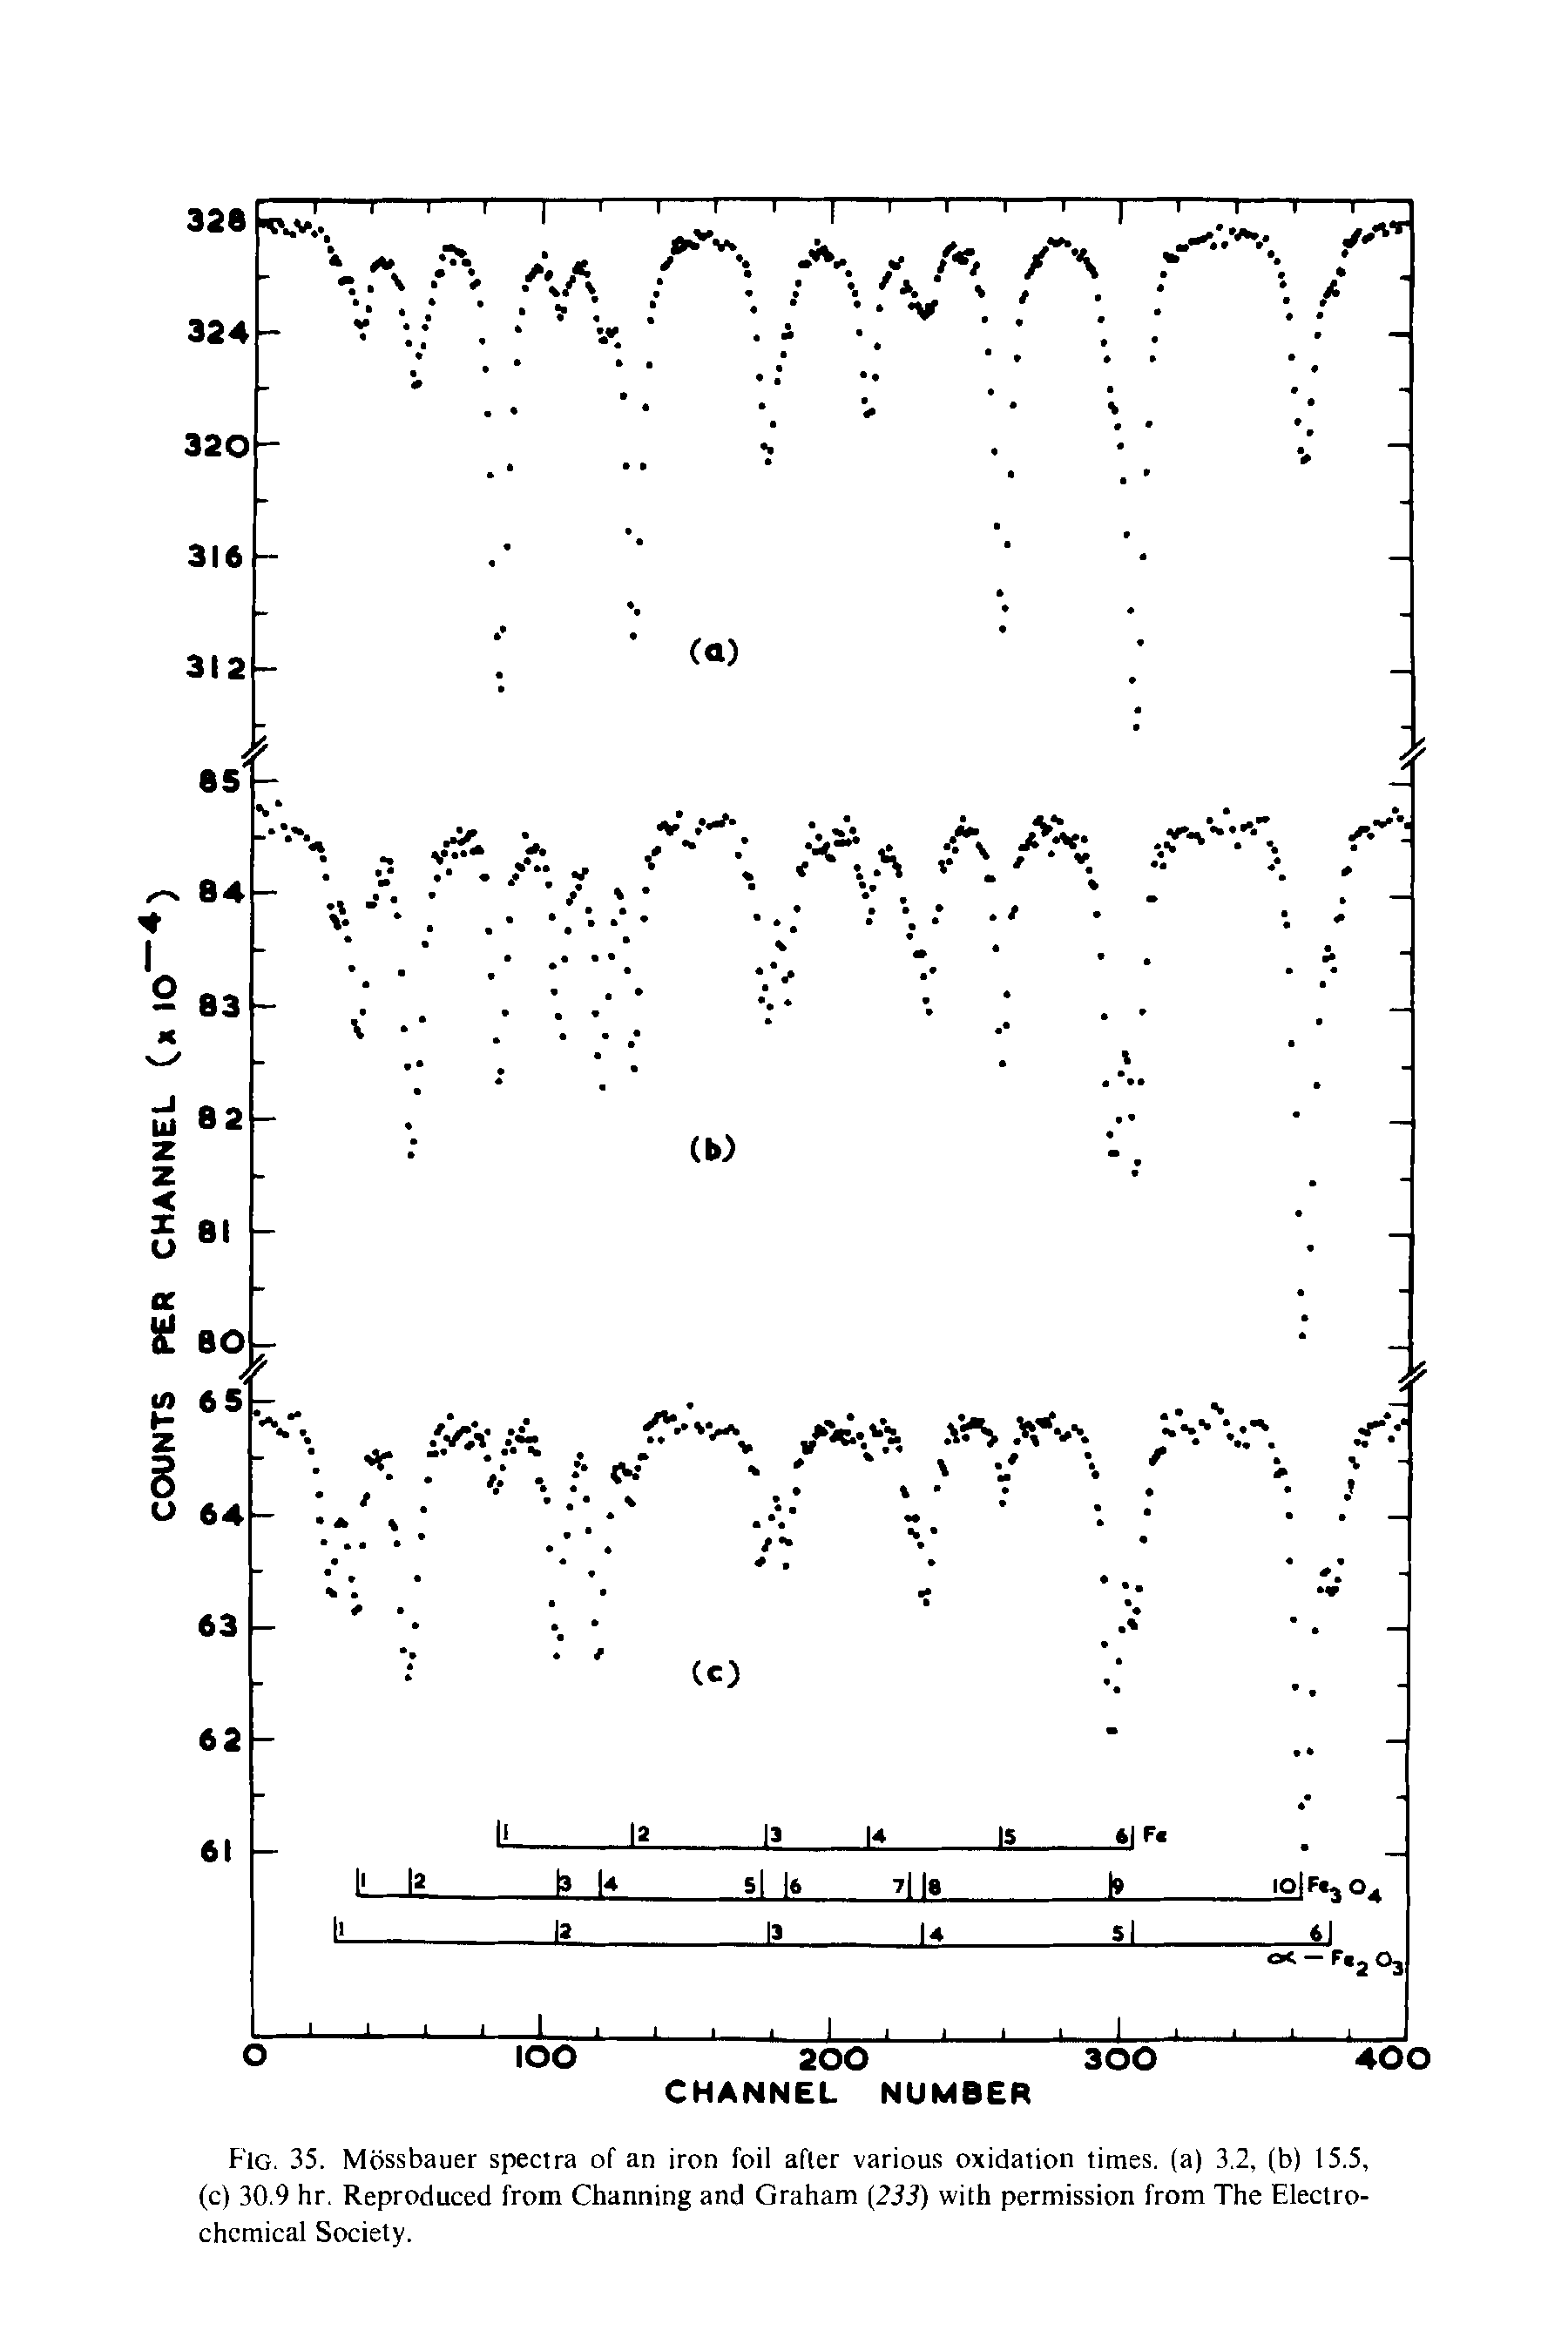 Fig. 35. Mossbauer spectra of an iron foil after various oxidation times, (a) 3.2, (b) 15.5, (c) 30.9 hr. Reproduced from Channing and Graham (233) with permission from The Electrochemical Society.